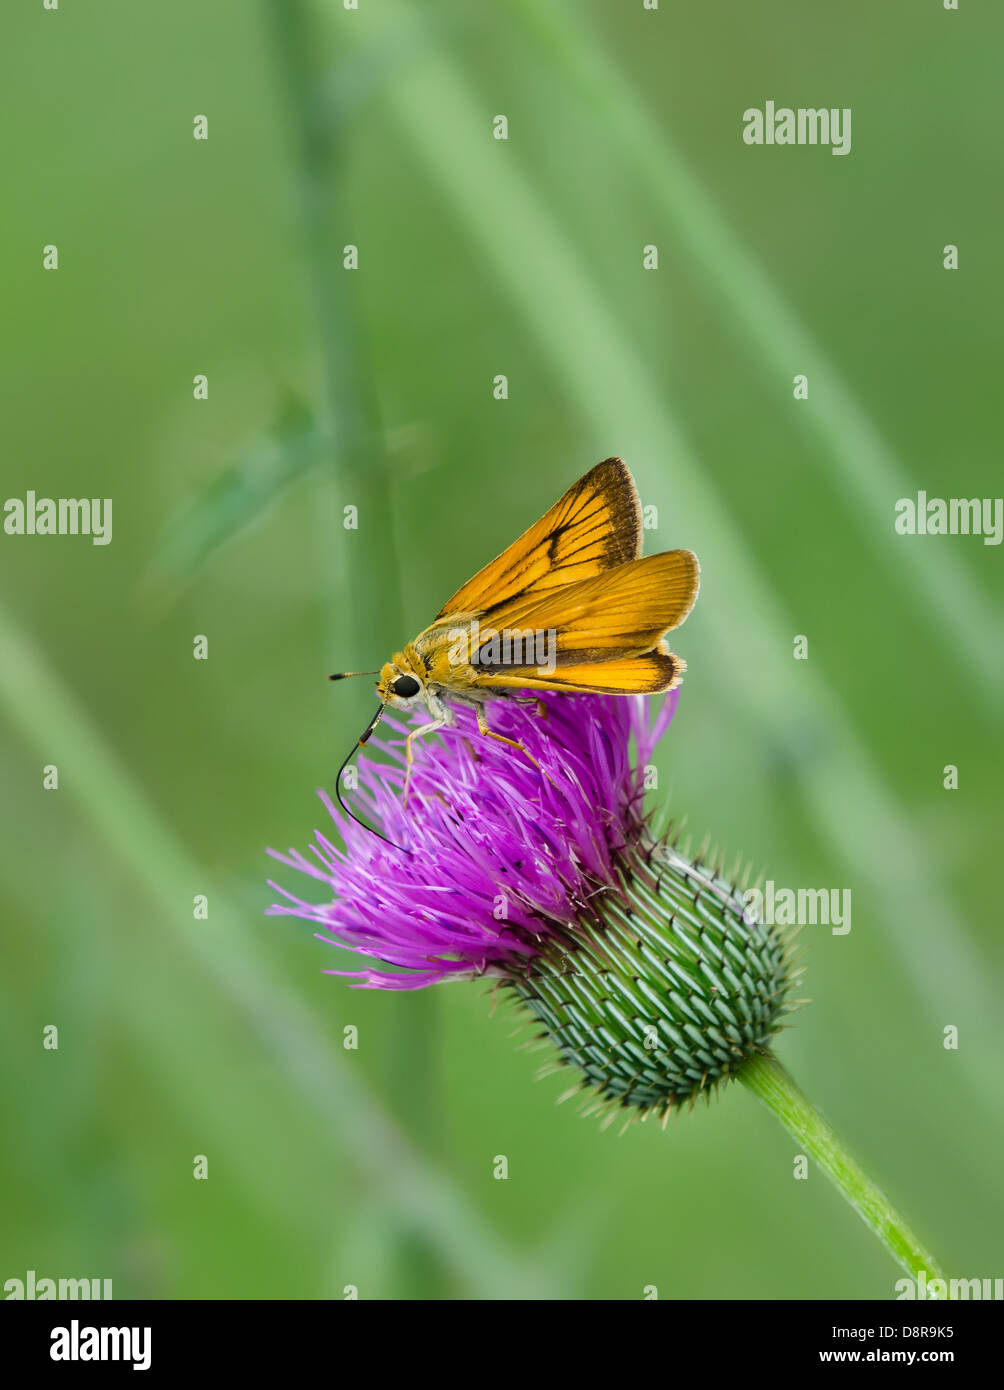 Skipper butterfly feeding on Thistle wildflowers. Soft green background. Stock Photo